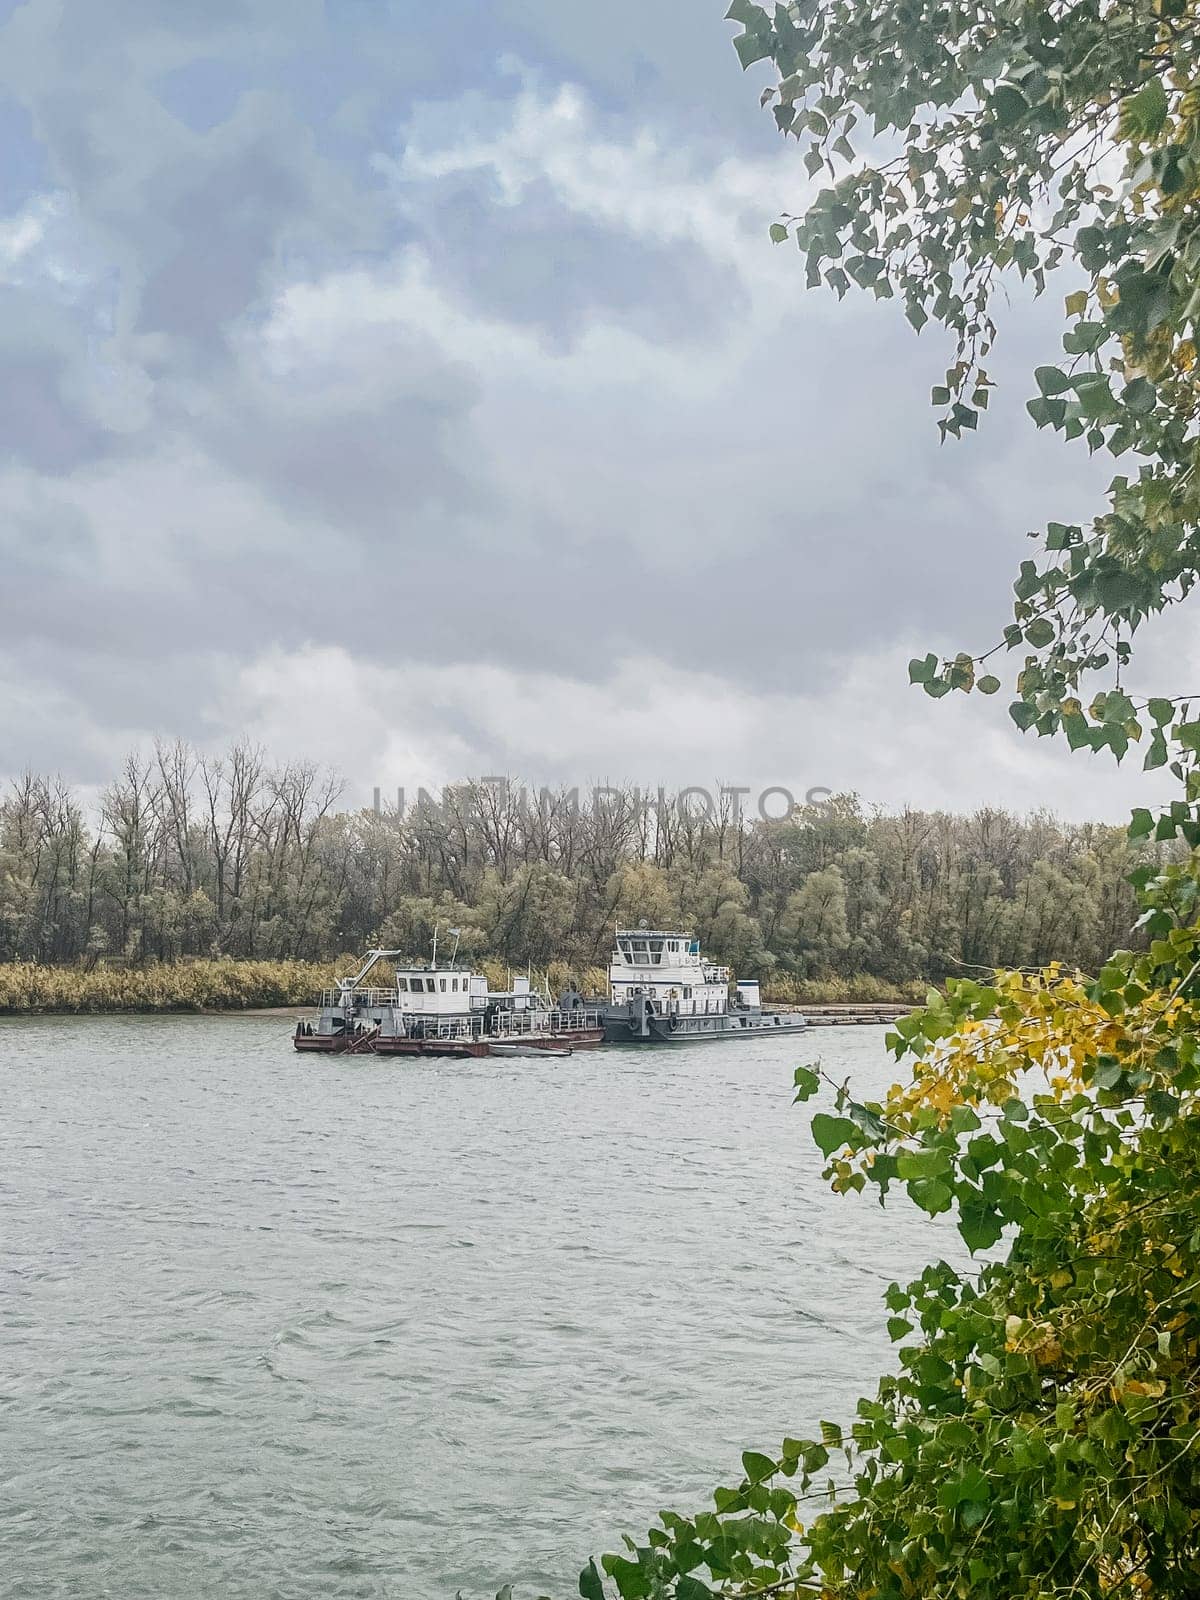 Tugboats on the river with an overcast sky and autumn trees on the shore by Pukhovskiy